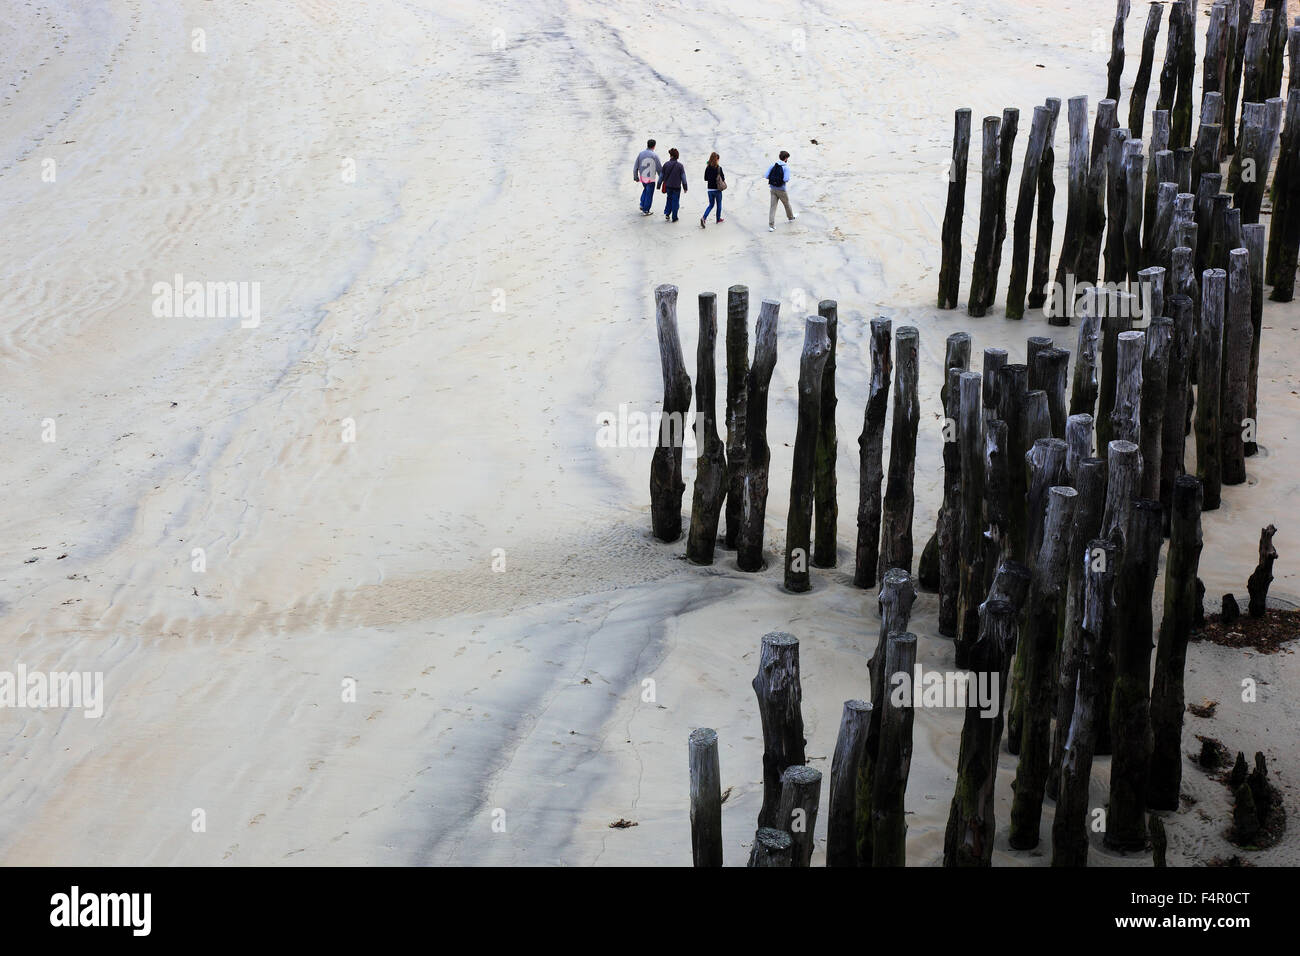 France, Brittany, Saint Malo, People walking at low tide walk on the sandy beach, wooden poles stuck in the sand, lined up in ro Stock Photo